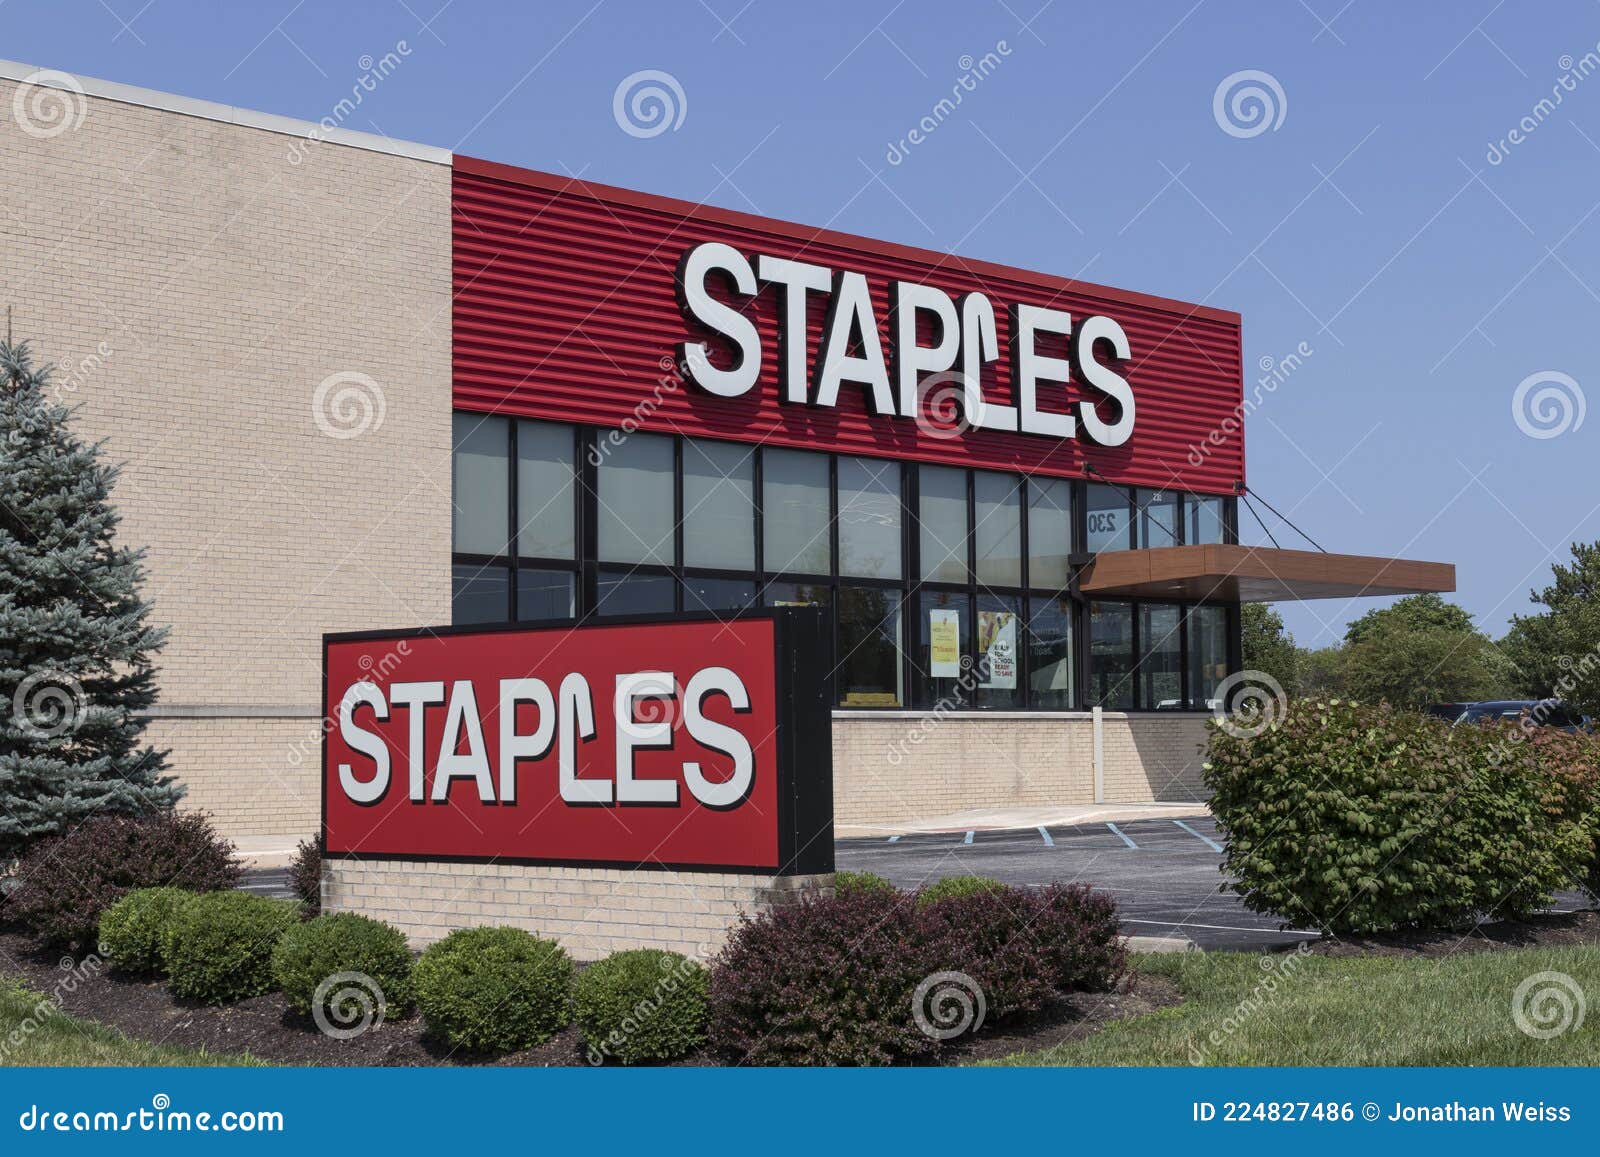 staples-office-supply-retail-location-staples-is-a-office-supply-store